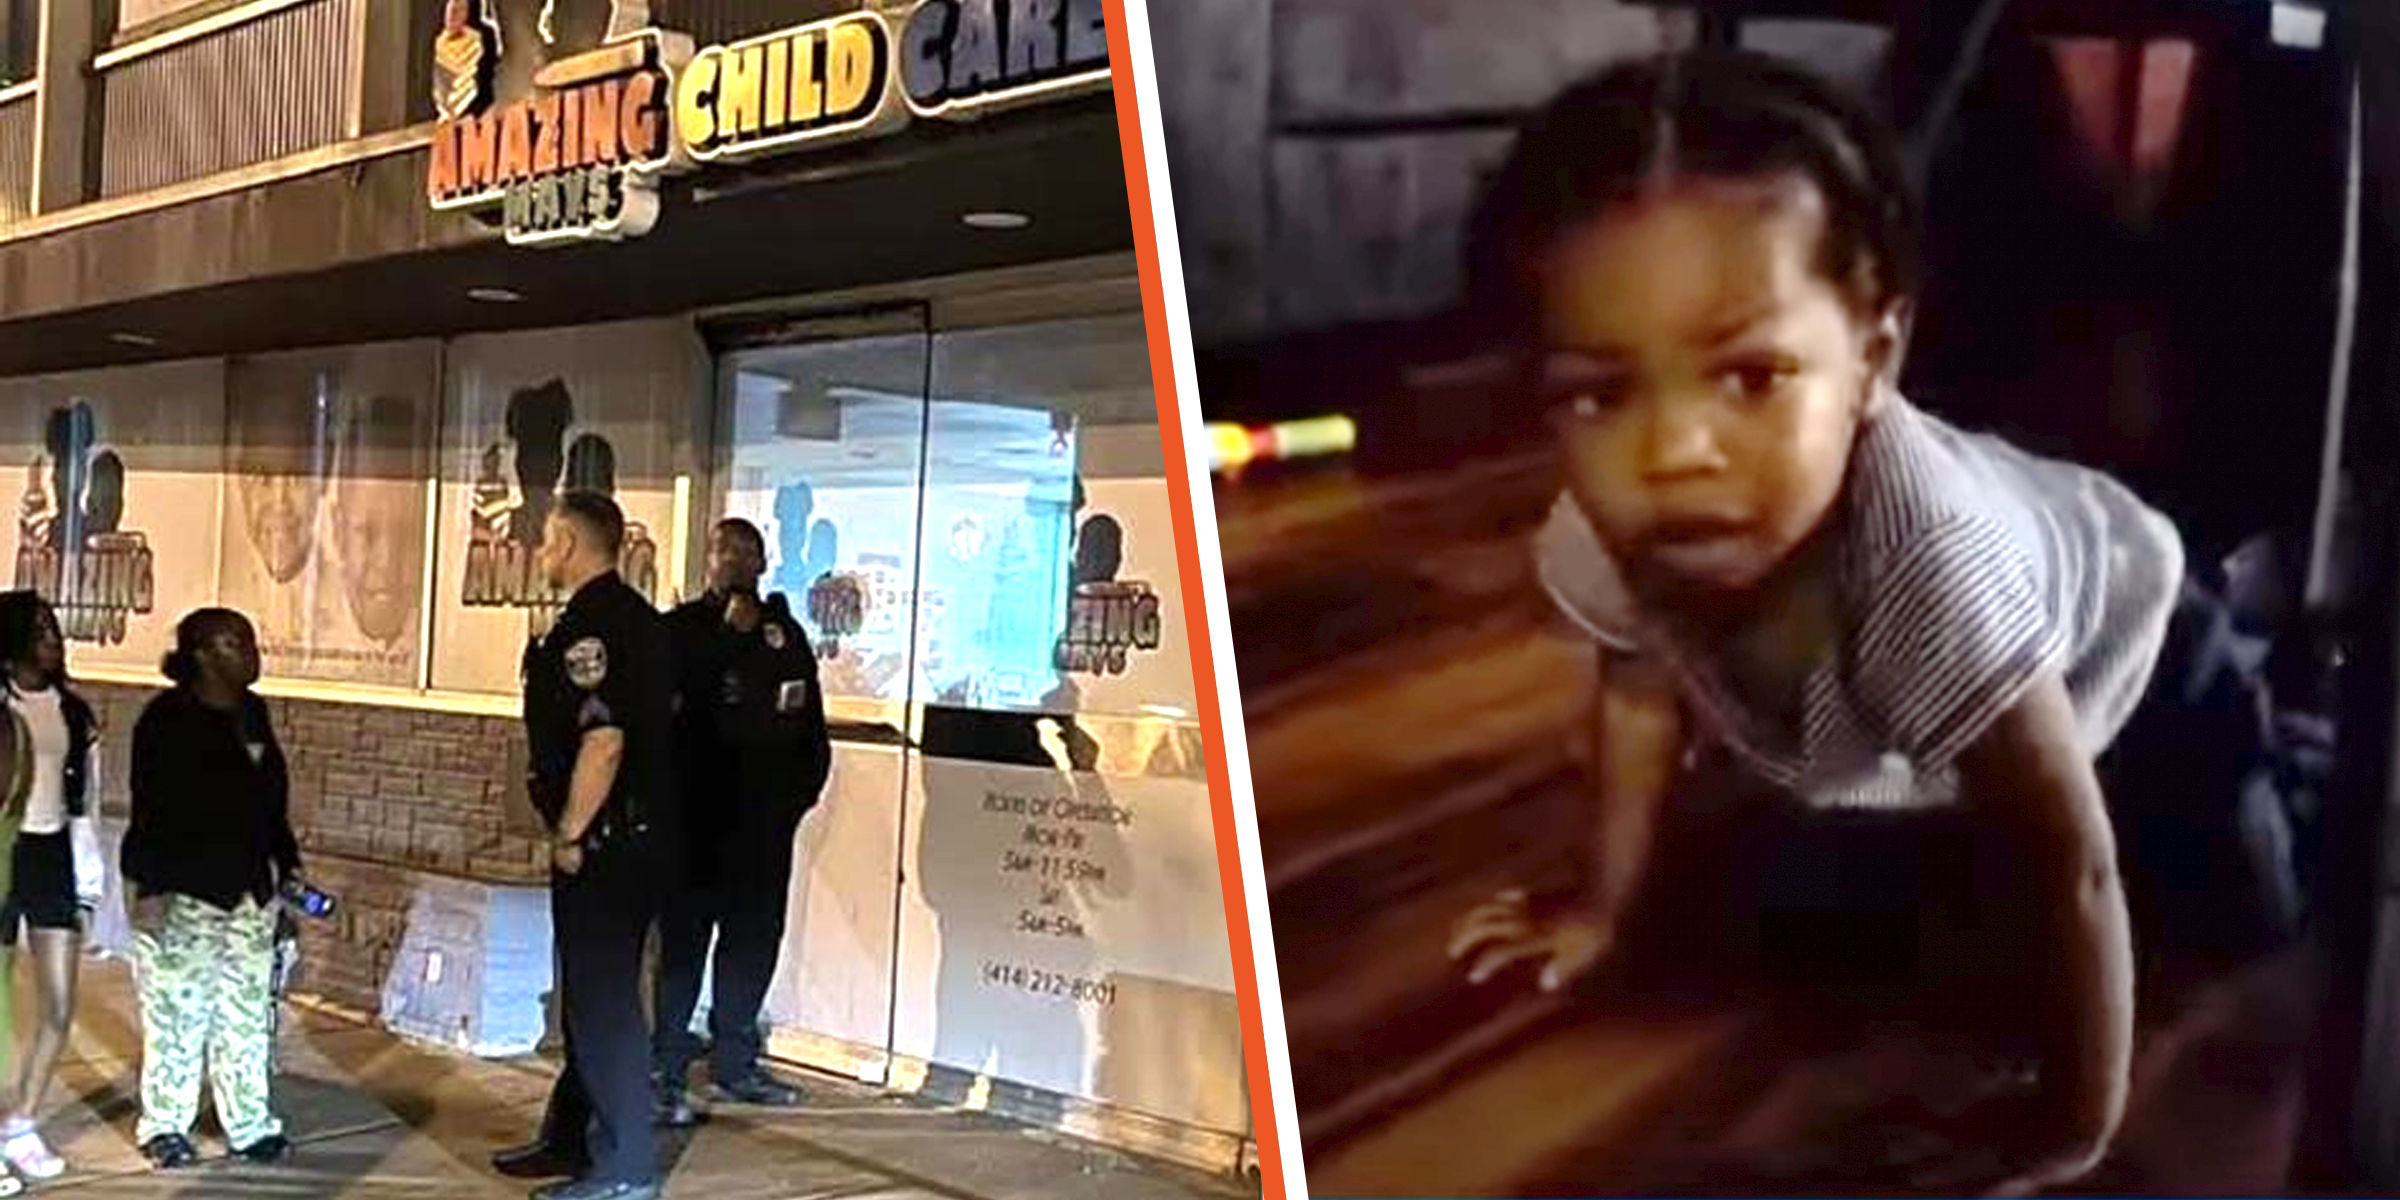 A police presence outside Amazing Mays Child Daycare (L) 1-year-old Kay'vontae (R). │Source: facebook.com/fox6news youtube.com/@fox6milwaukee